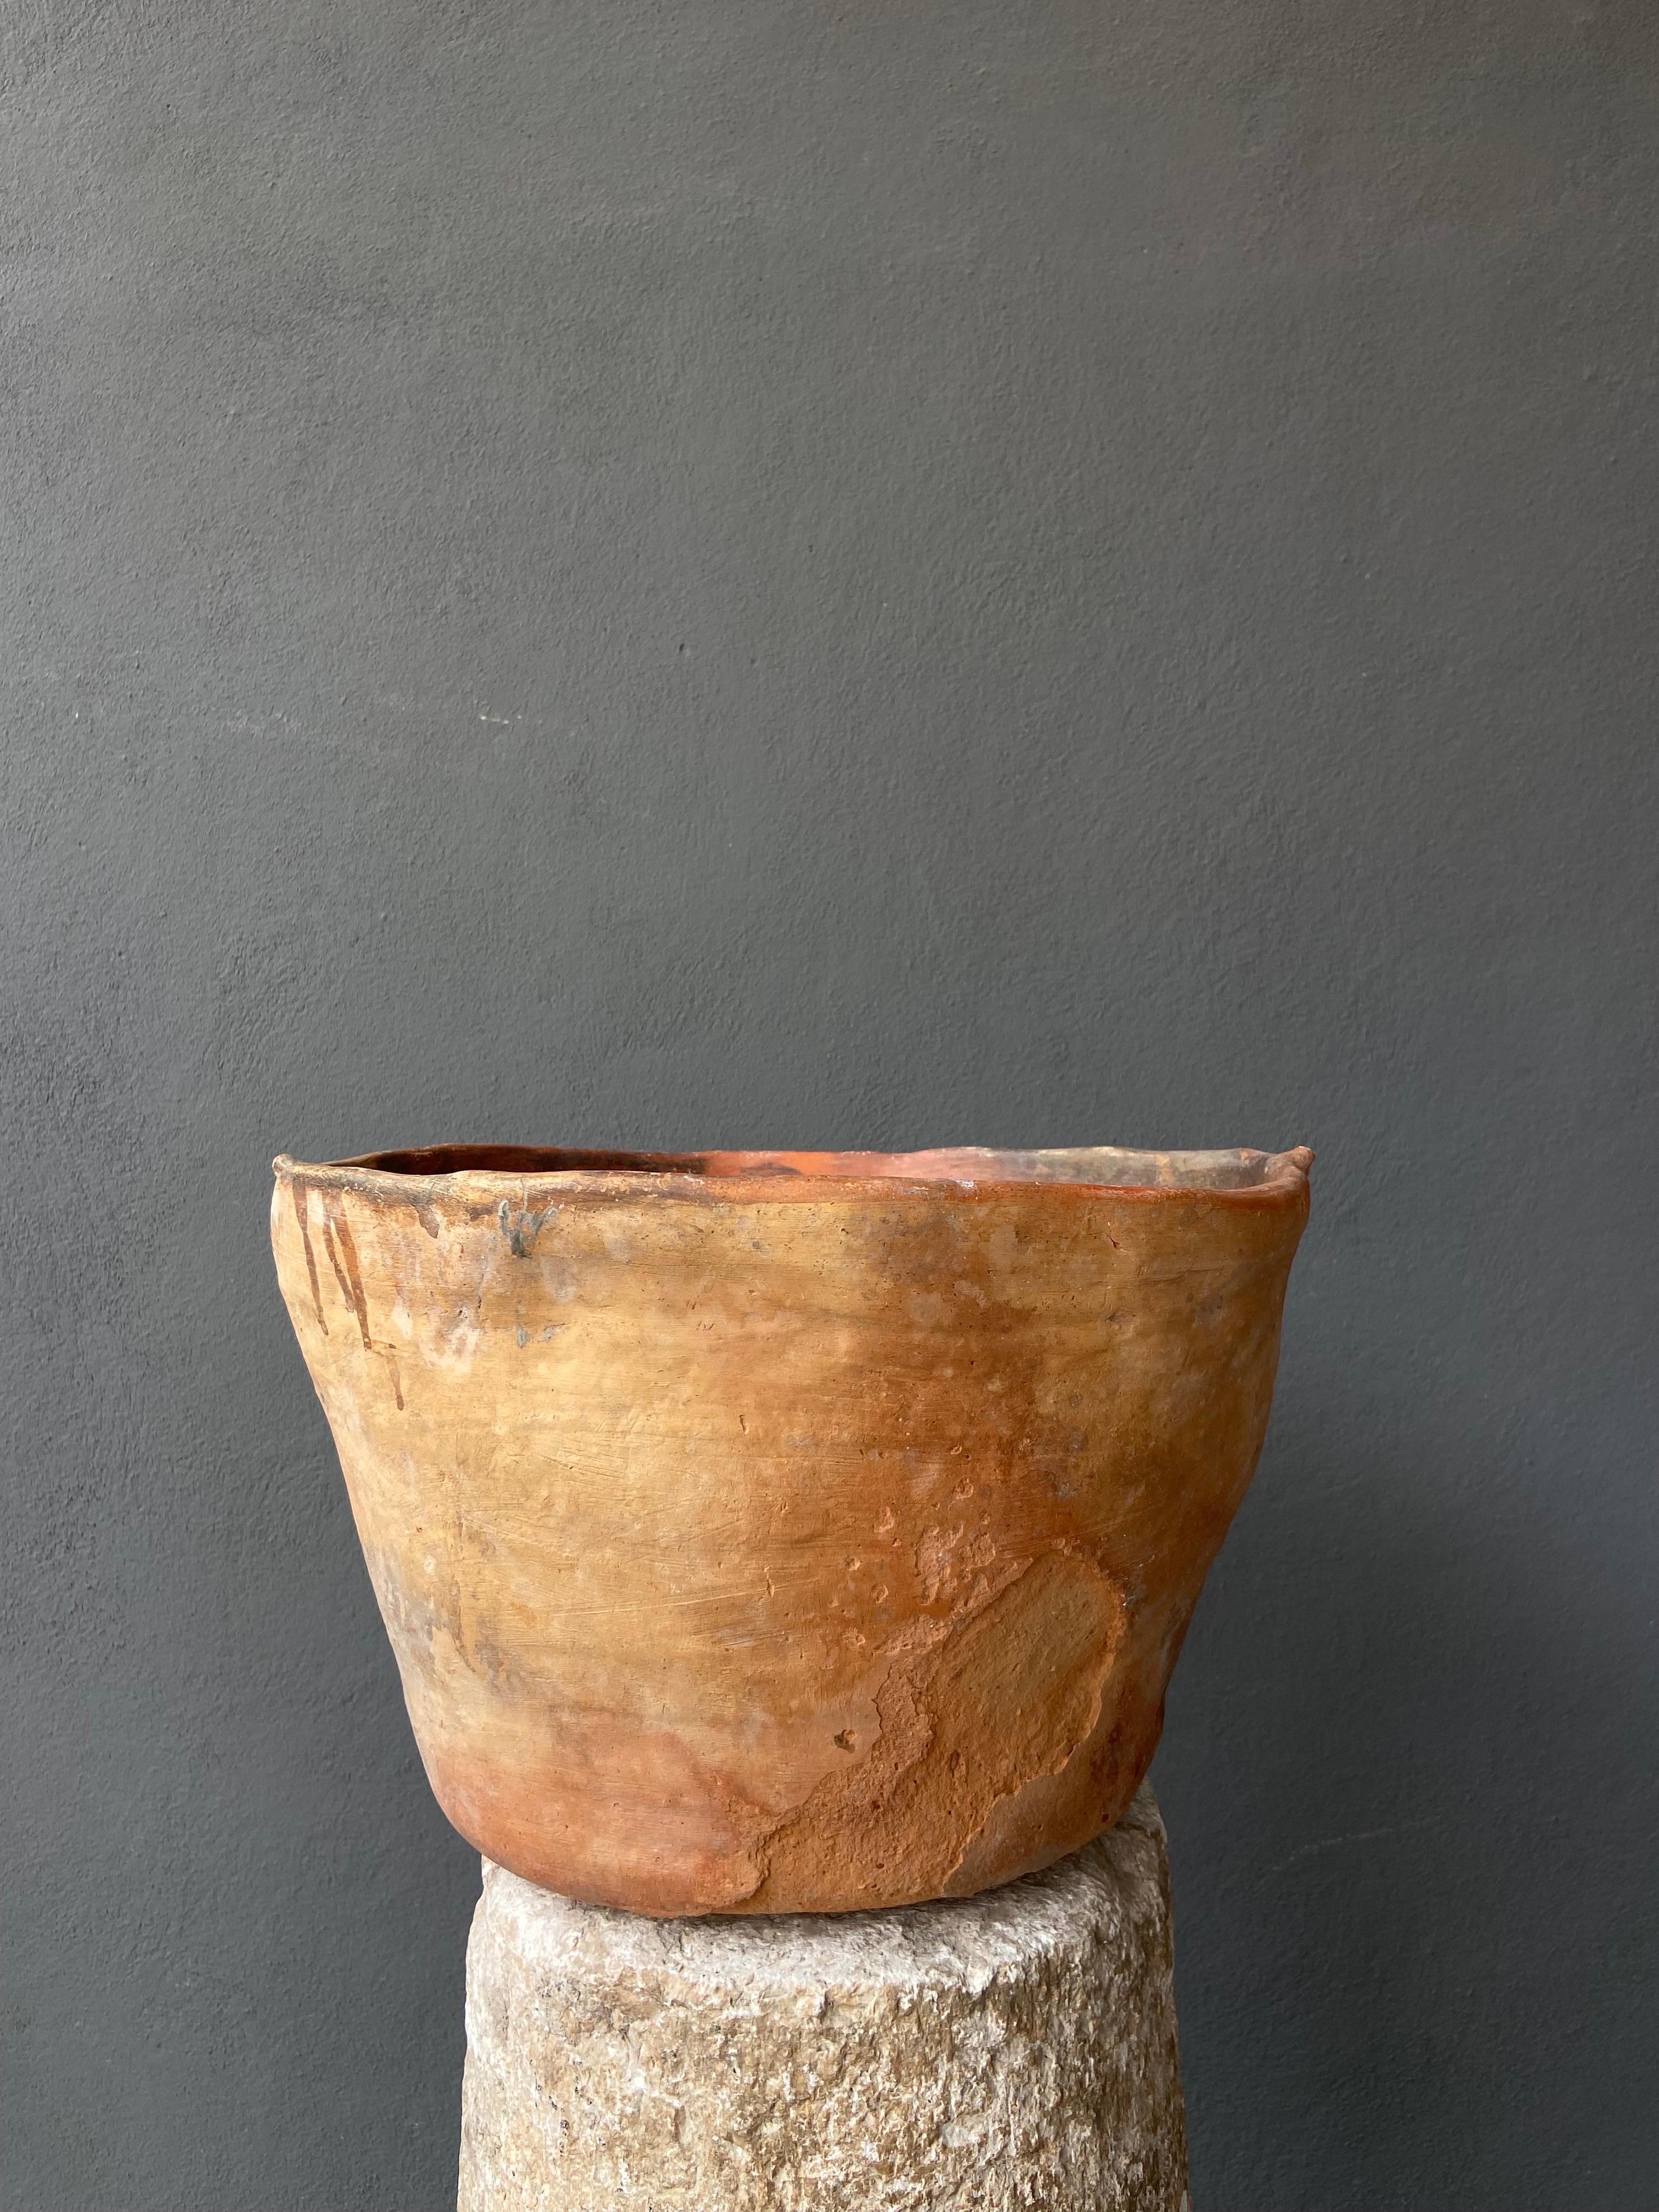 Hand-Crafted Terracotta Bowl from Mexico, circa 1950s